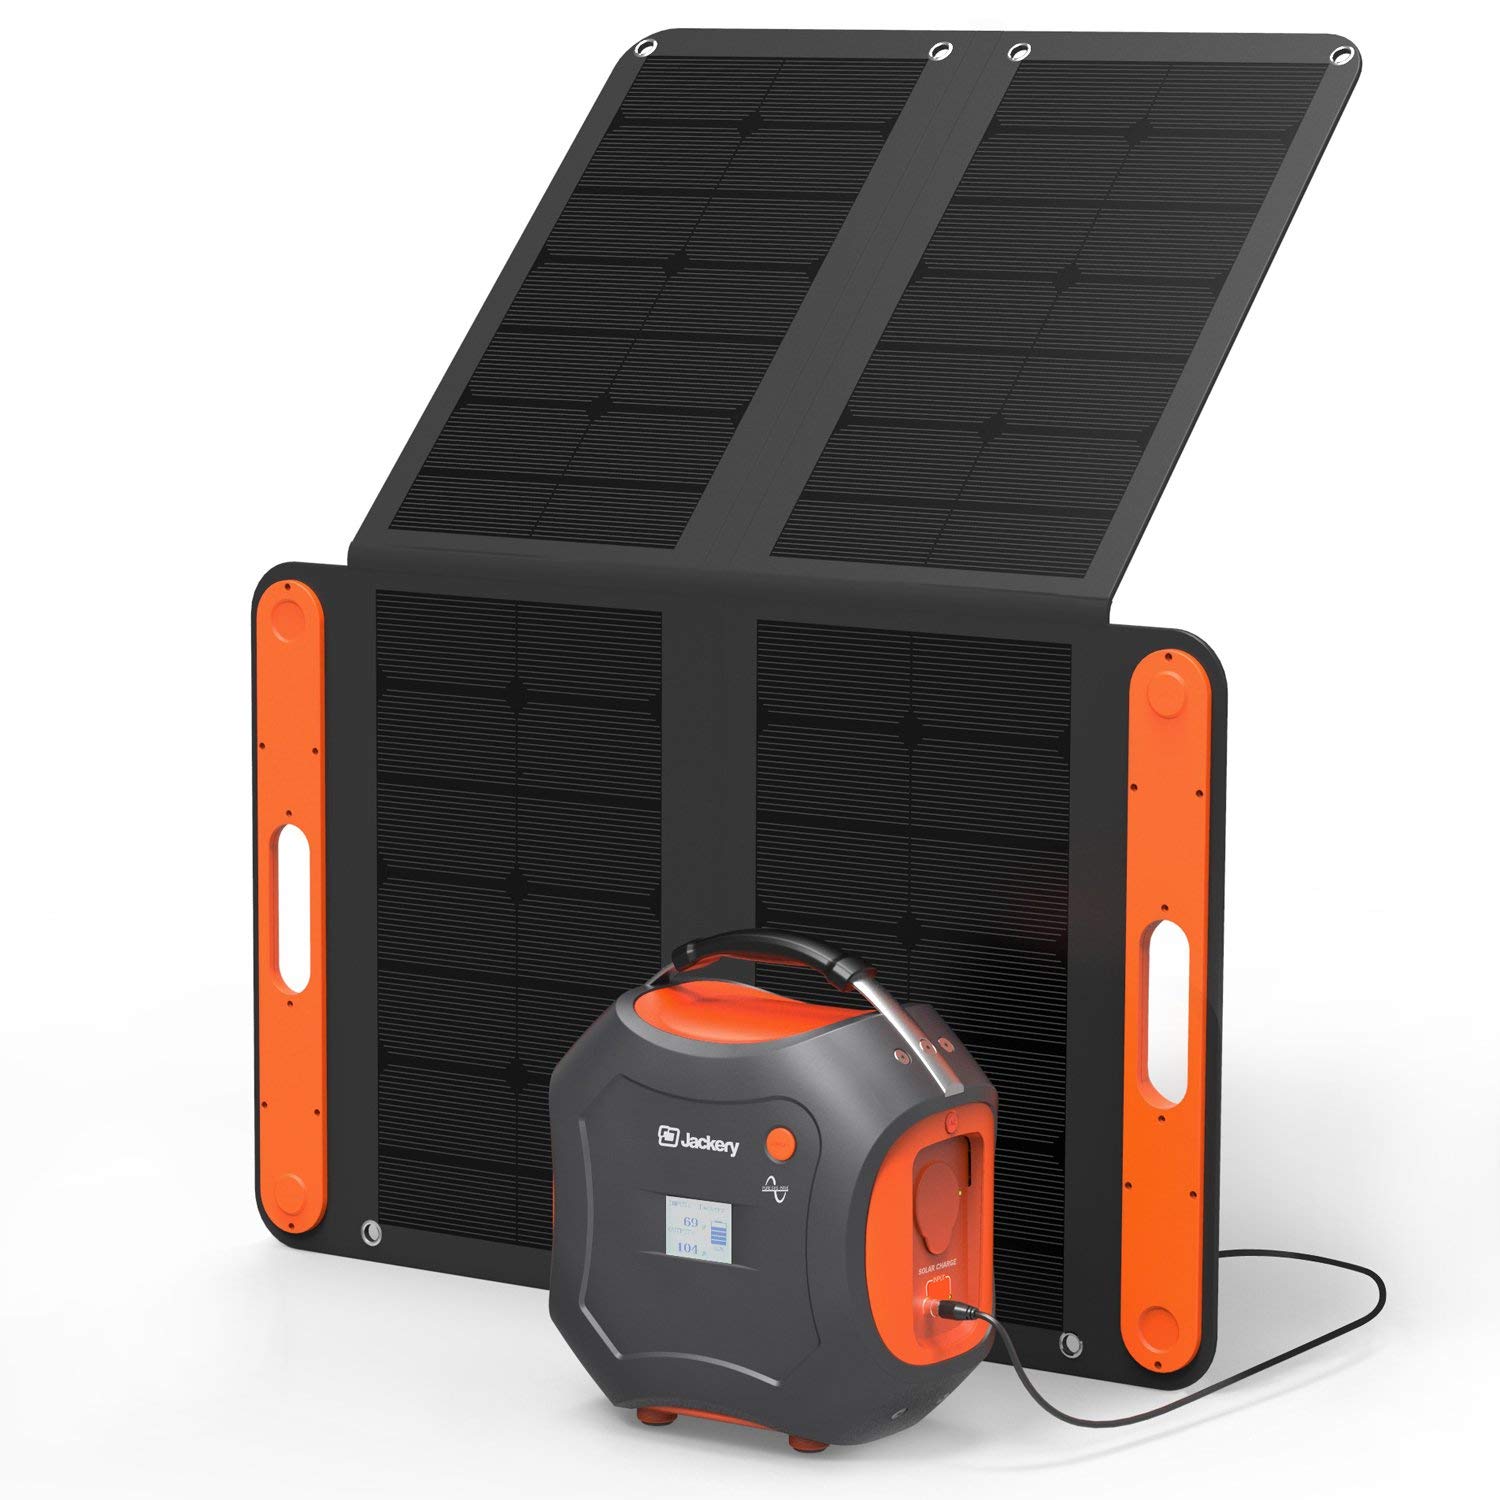 Top 10 Best Portable Solar Generator for Camping in 2021 Reviews